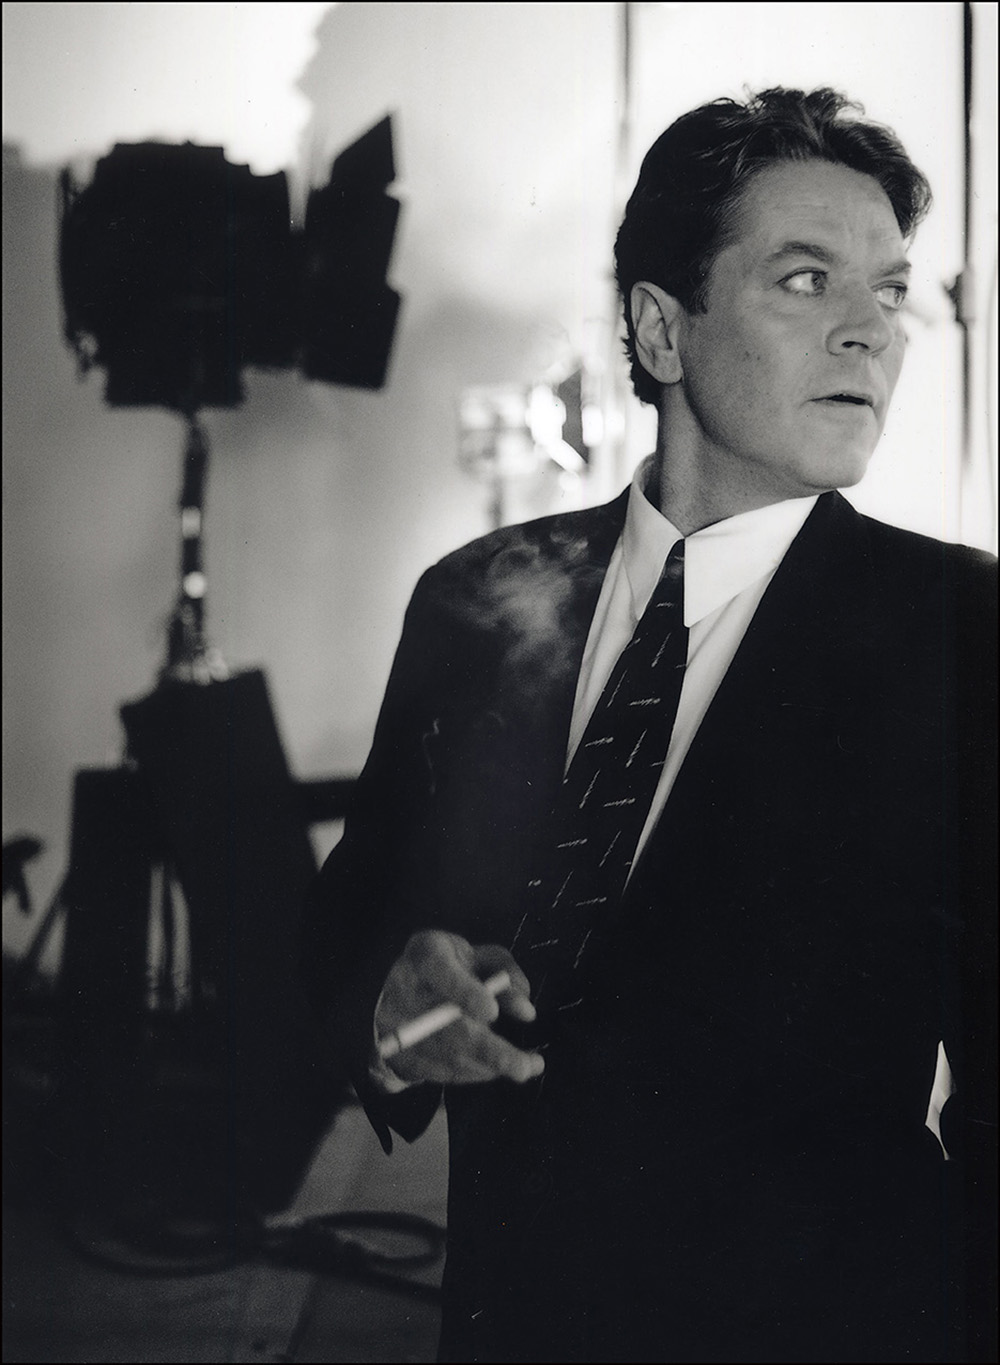 Robert Palmer records video, London, early 90s